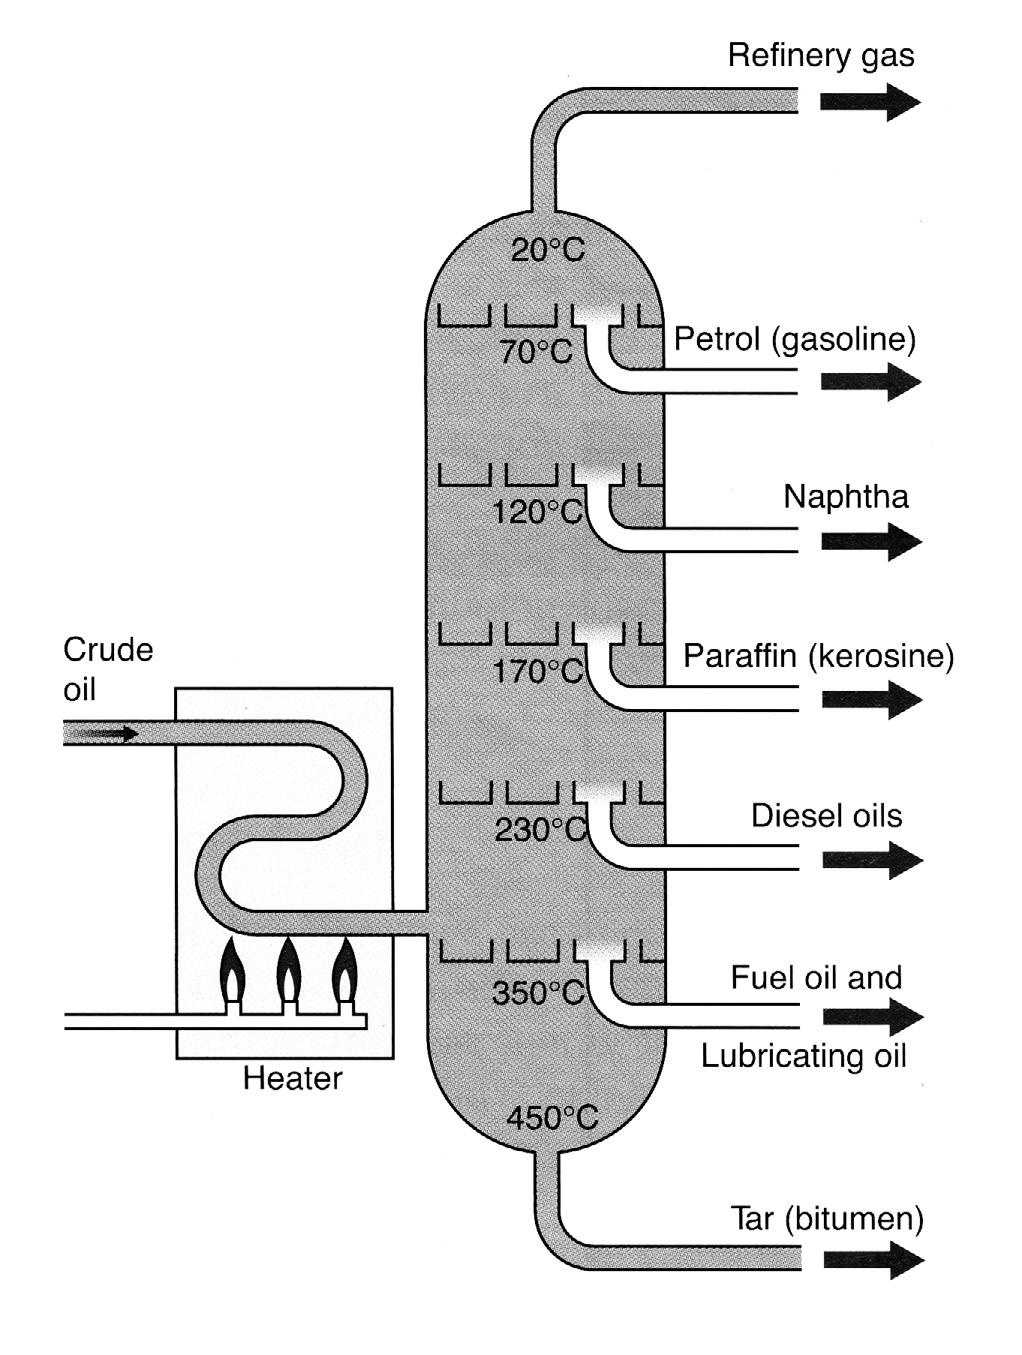 2 Crude oil is made up of many hydrocarbons and these can be separated using fractional distillation. (a) (i) Describe how fractional distillation separates the fractions in crude oil.